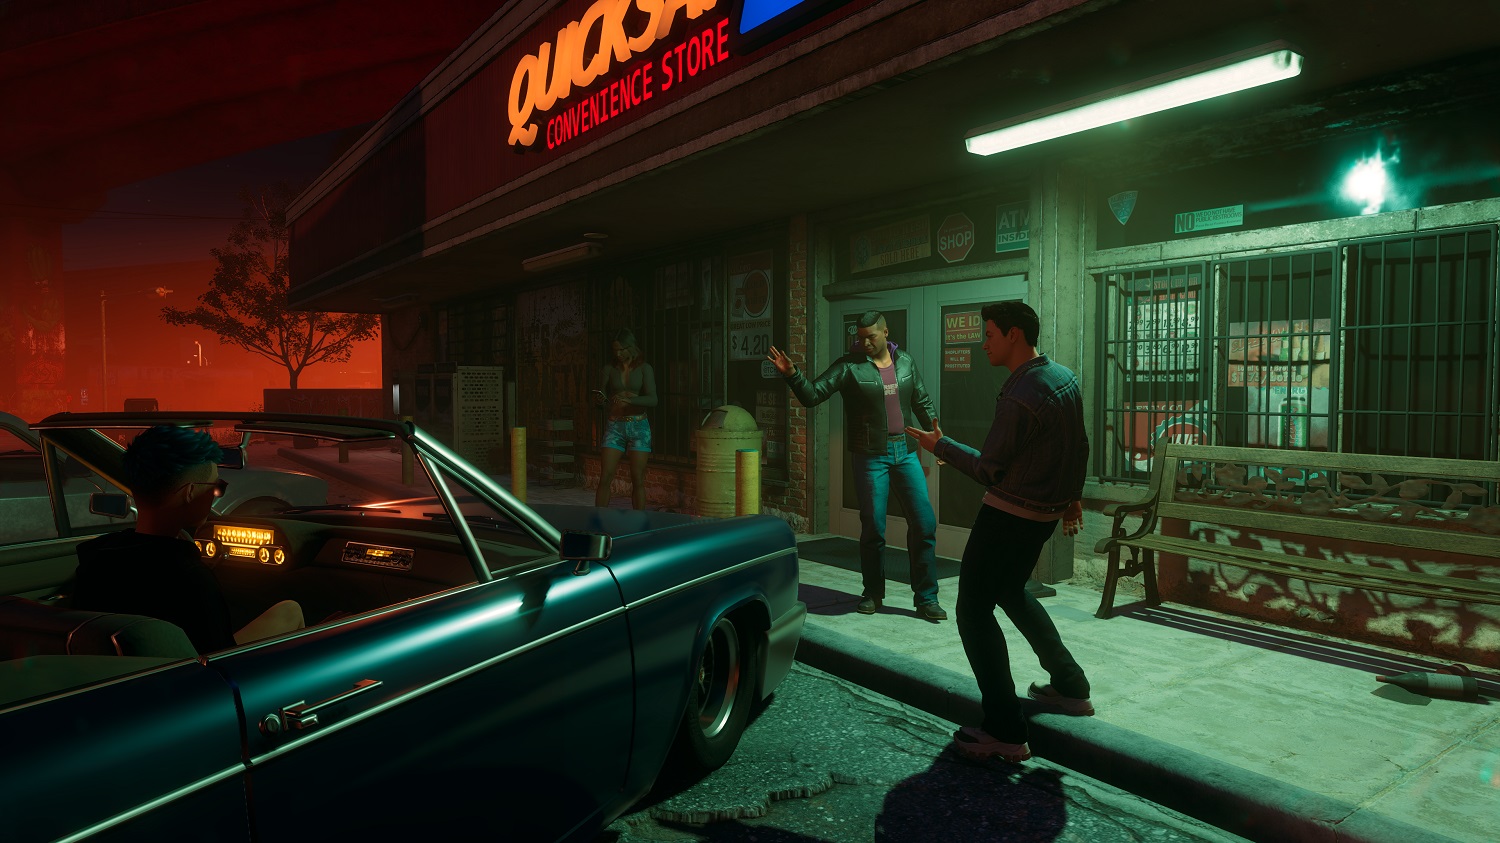 How Saints Row Co-Op Works, How It Affects Single-Player - Game